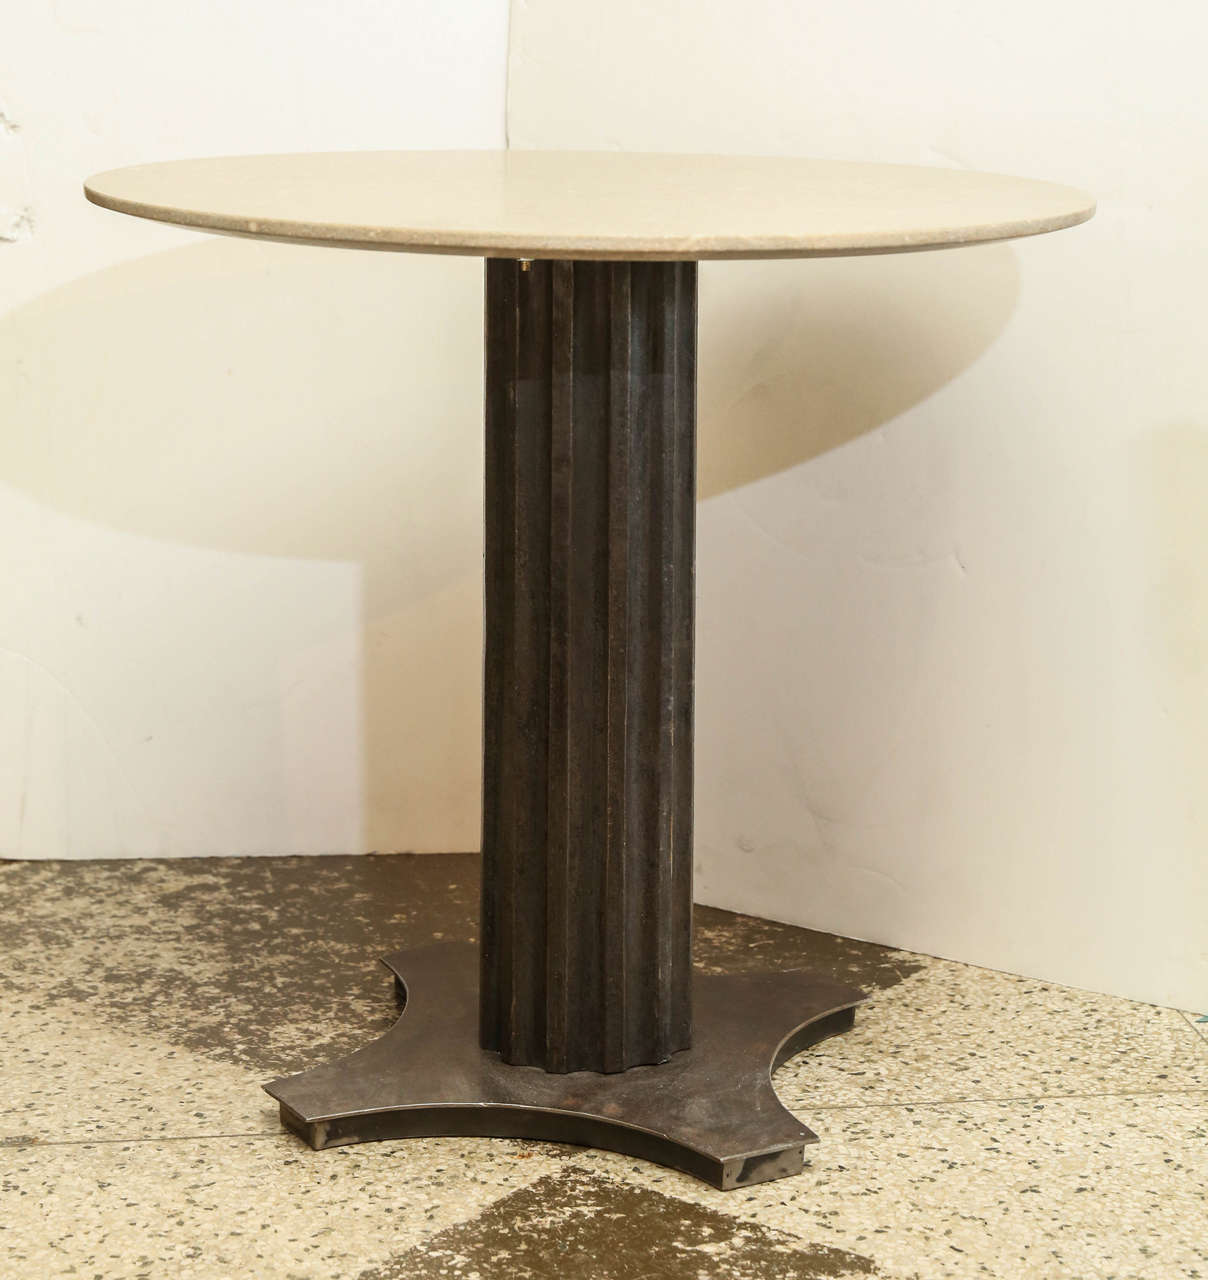 Two limestone top steel tables, newly honed round limestone tops raised upon antique cast steel fluted pedestals. Each side table sold individually priced $2,800 each.